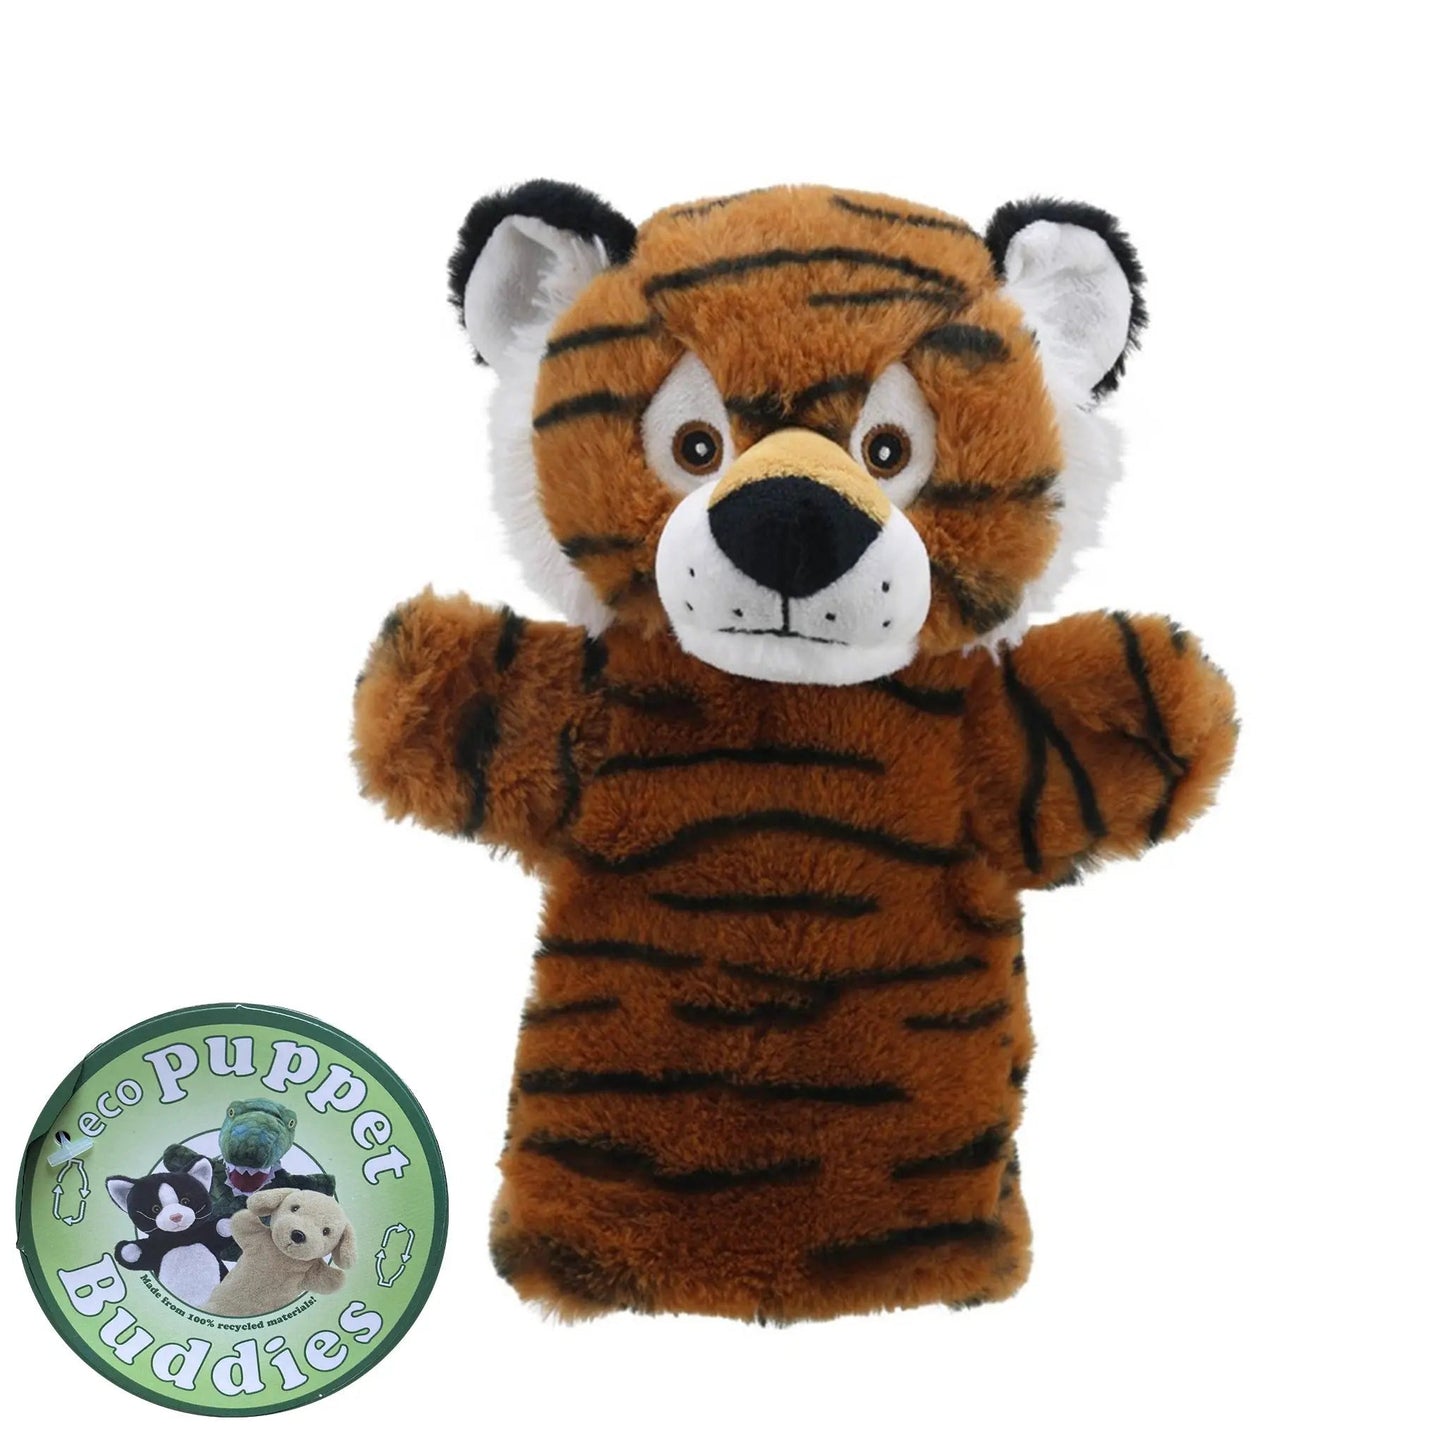 Tiger Eco Puppet Buddies Hand Puppet - The Puppet Company - The Forgotten Toy Shop